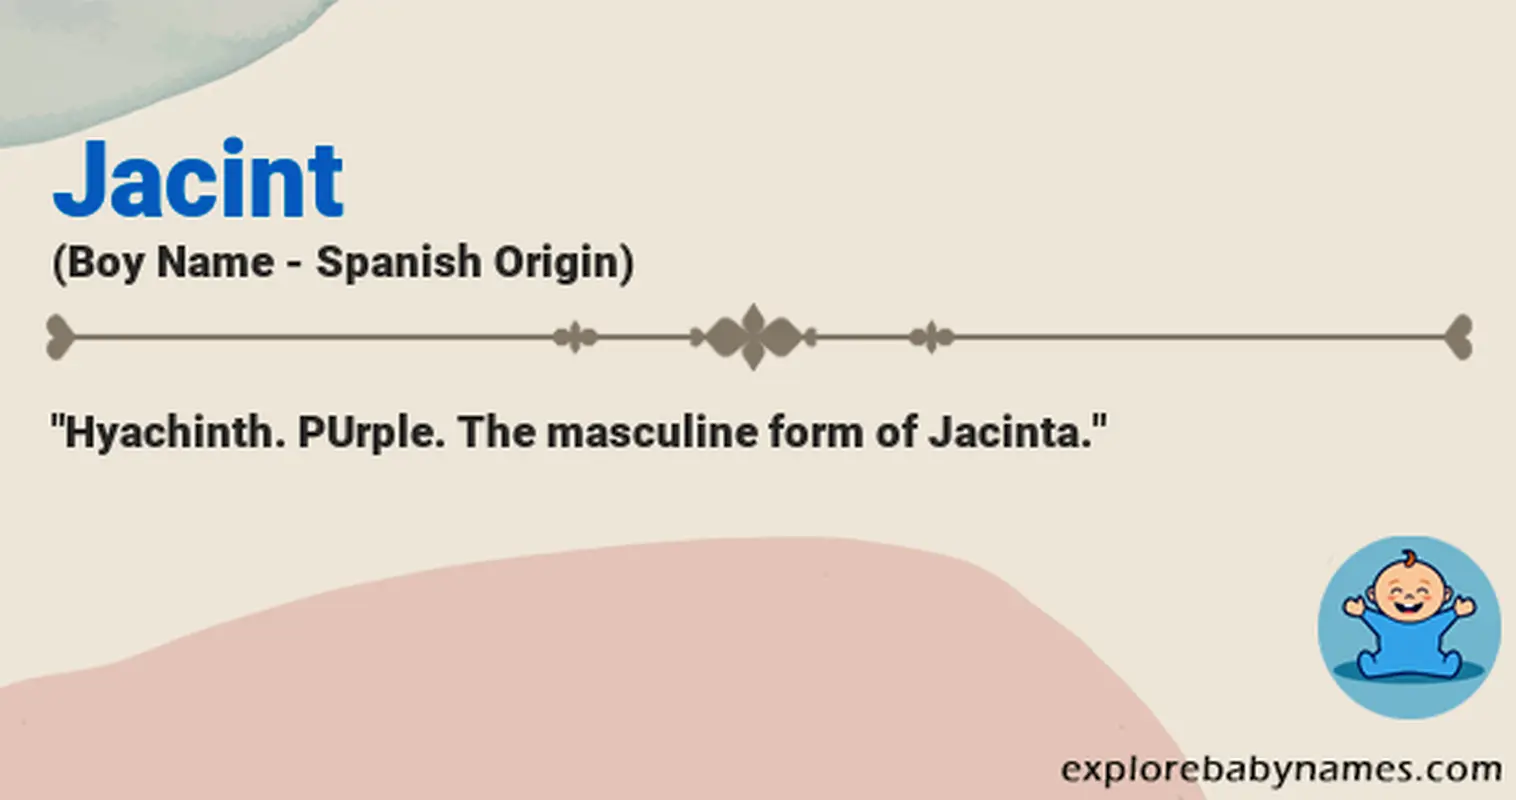 Meaning of Jacint